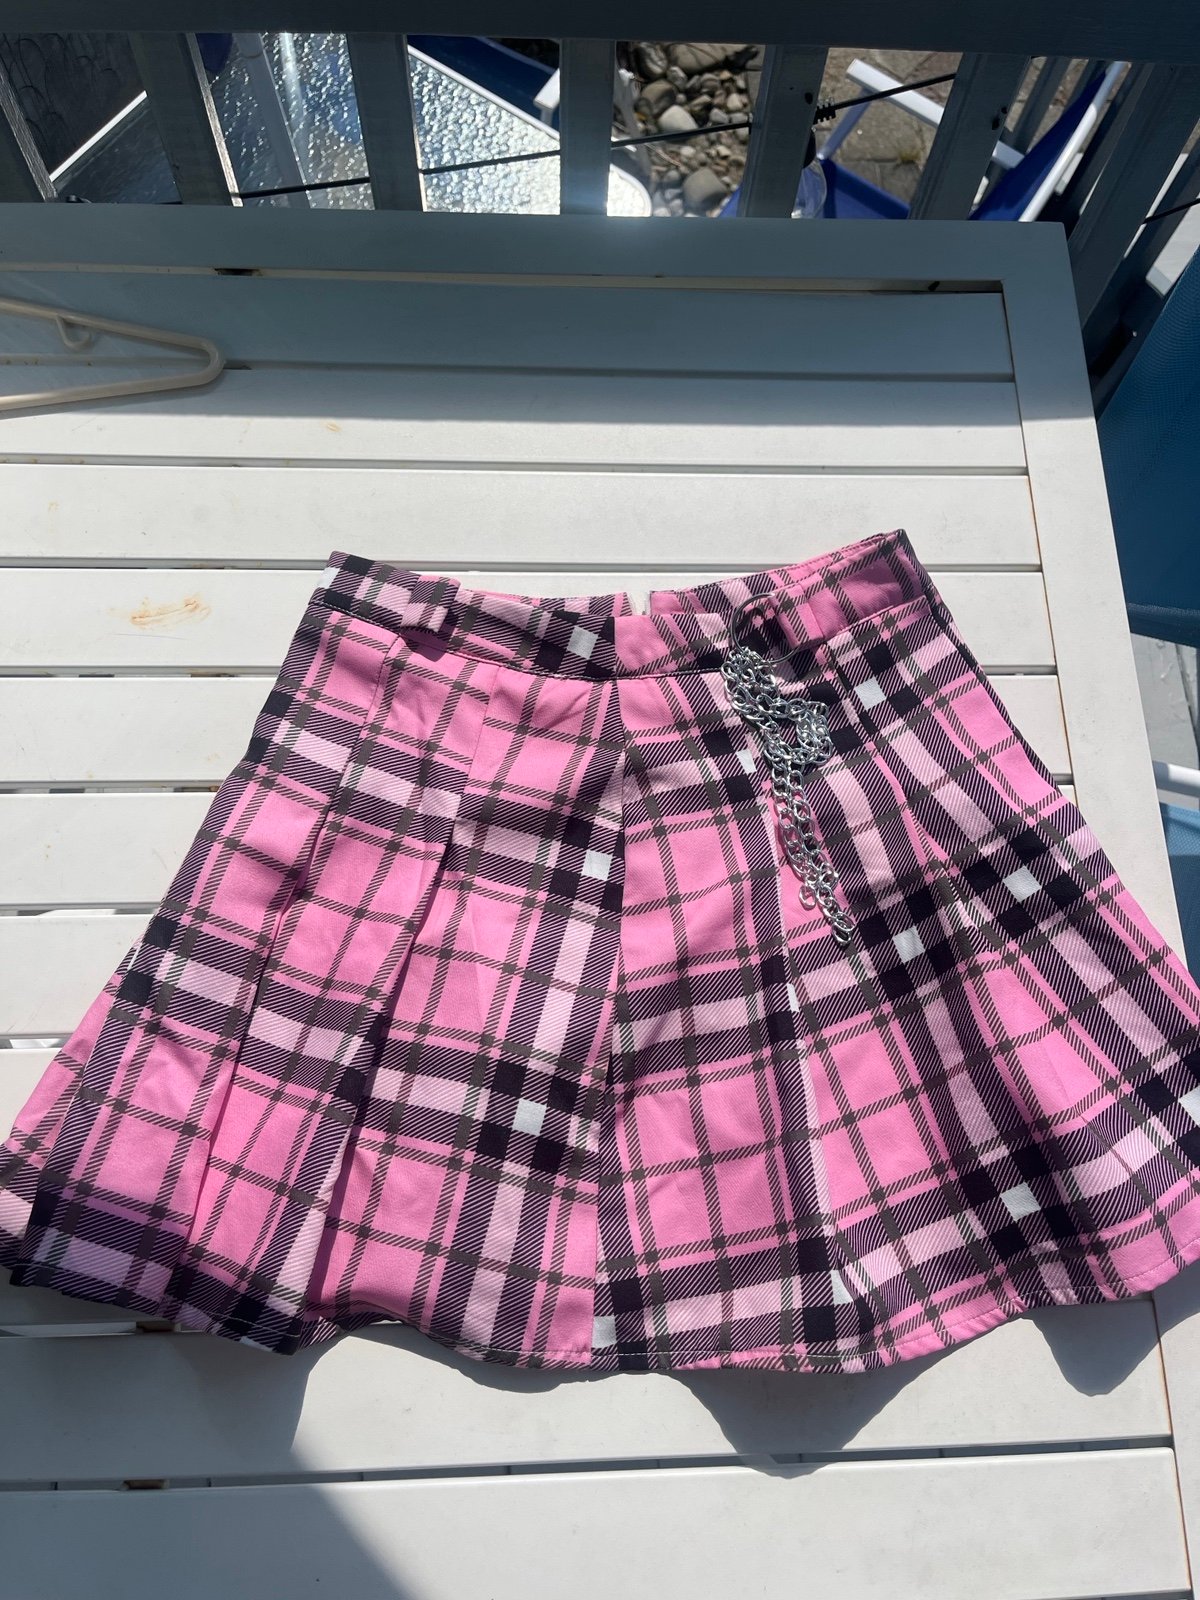 cheapest place to buy  Plaid skirt Jq6QdYBZc just for y